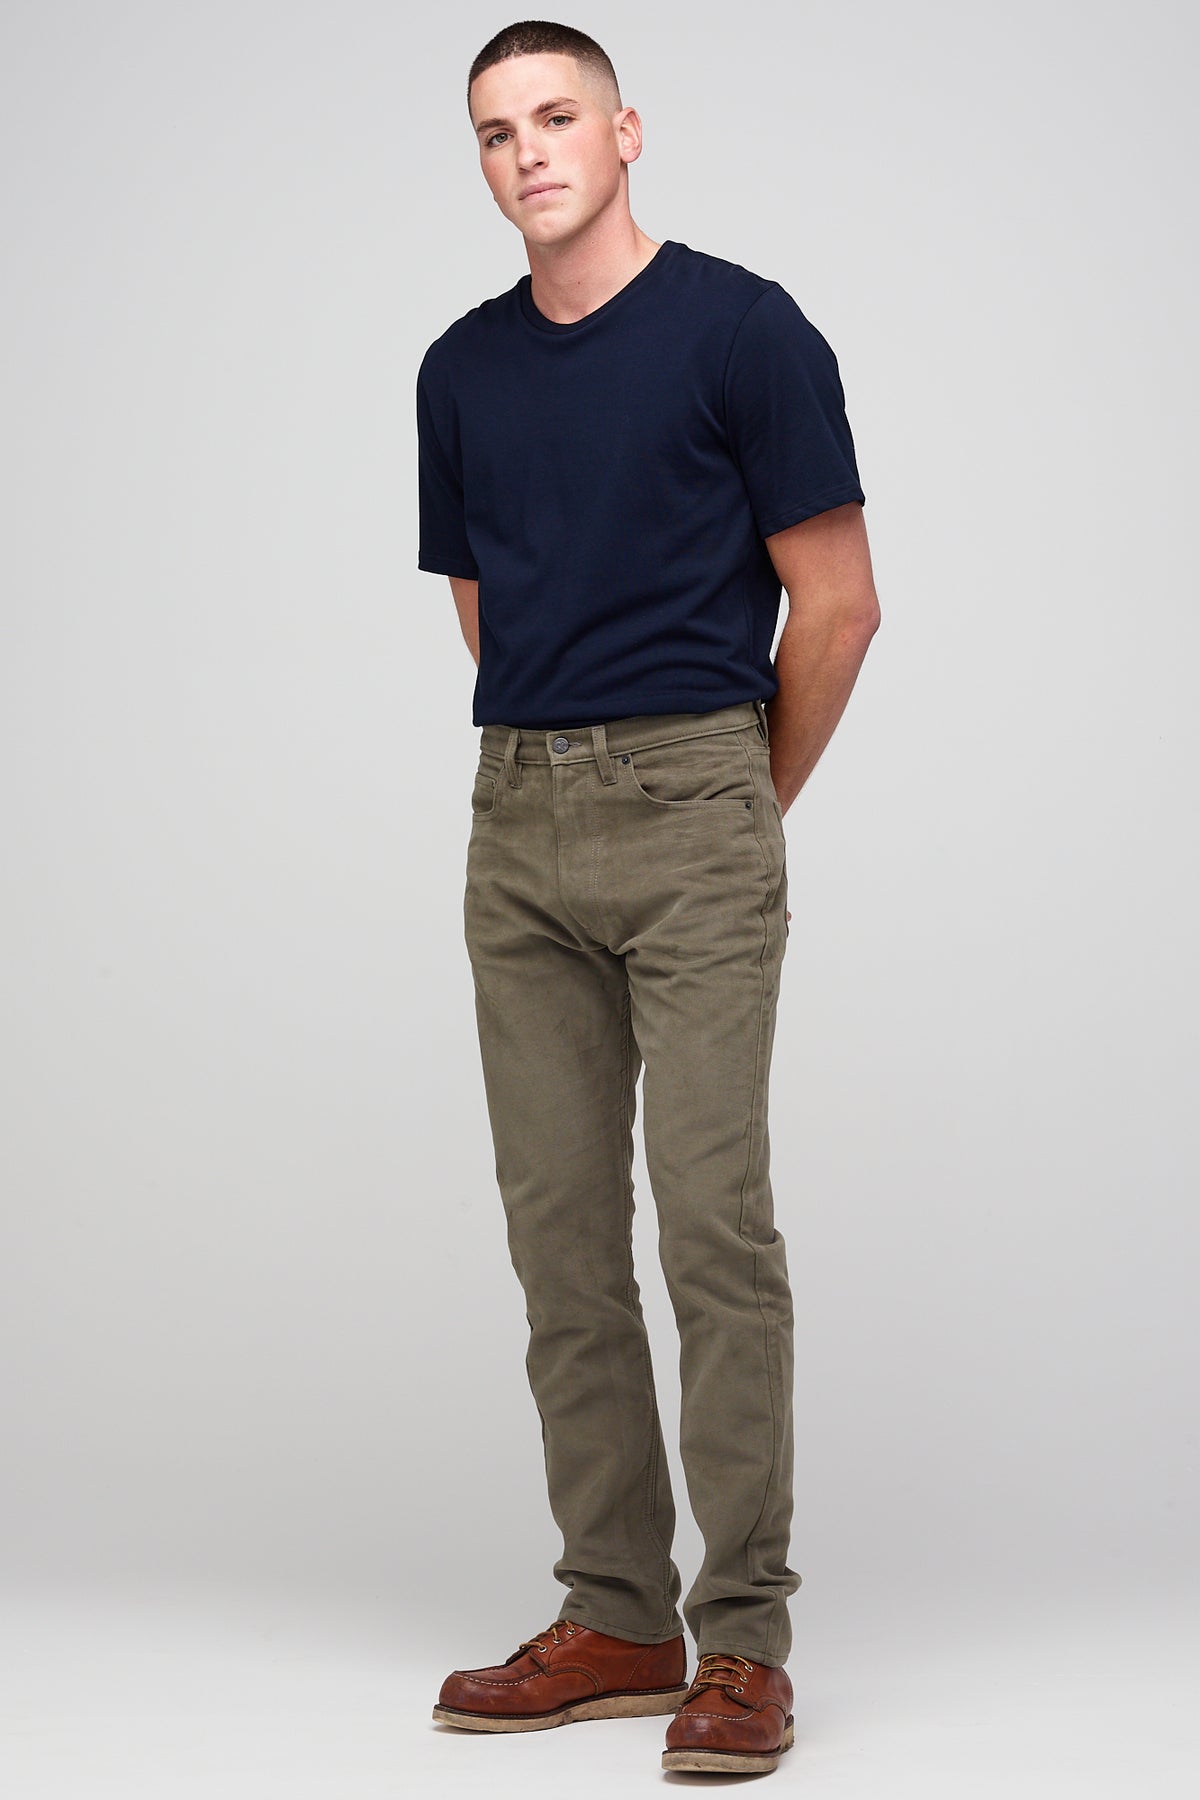 
            Brunette male in Olive Five Pocket Moleskin Jean styled with navy men&#39;s short sleeve t-shirt and brown leather shoes